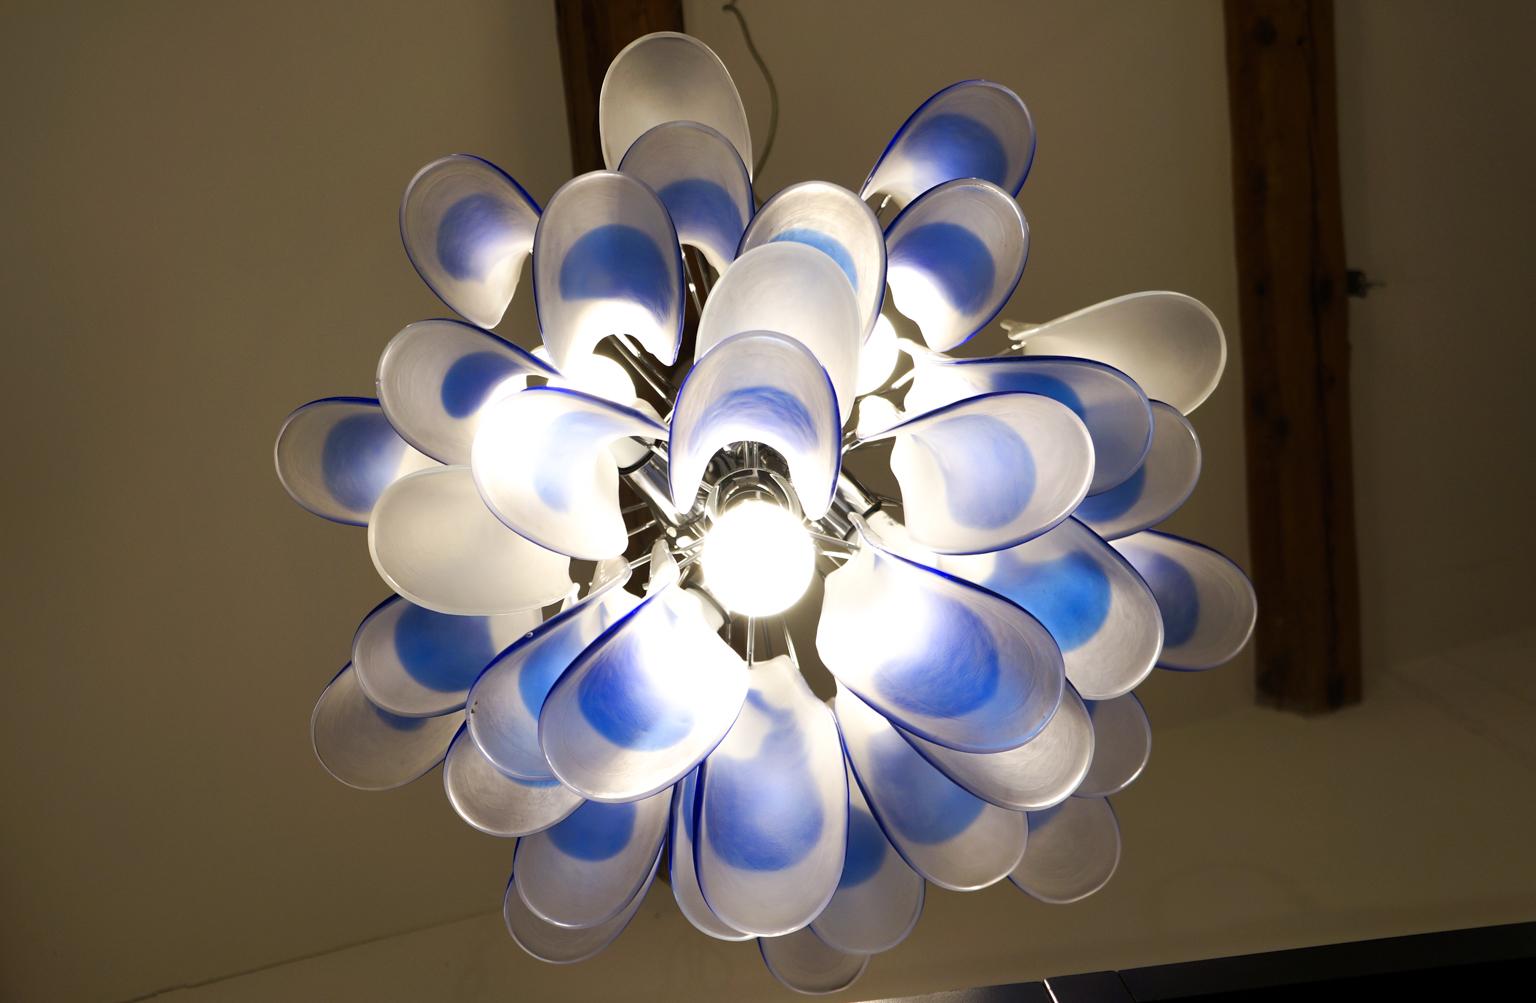 Alberto Donà Mid-Century Modern Crystal Blue Murano Glass Selle Chandelier, 1992 For Sale 7